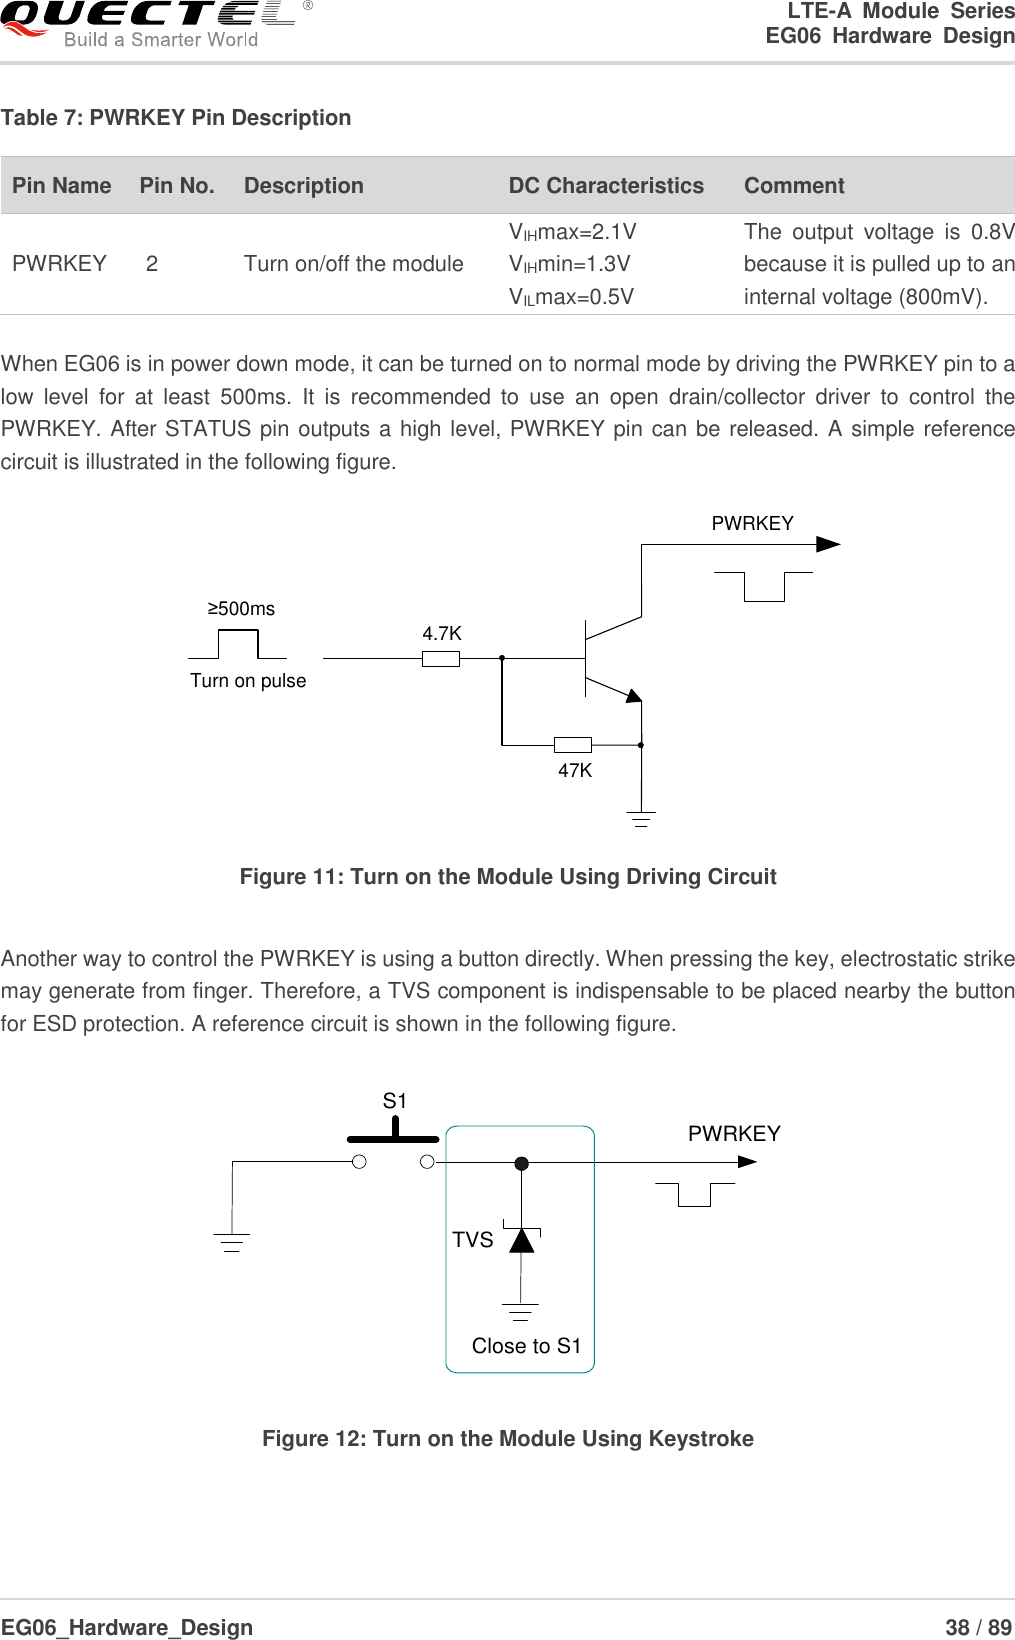 LTE-A  Module  Series                                                  EG06  Hardware  Design  EG06_Hardware_Design                                                               38 / 89    Table 7: PWRKEY Pin Description  When EG06 is in power down mode, it can be turned on to normal mode by driving the PWRKEY pin to a low  level  for  at  least  500ms.  It  is  recommended  to  use  an  open  drain/collector  driver  to  control  the PWRKEY. After STATUS pin outputs a high level, PWRKEY pin can be released. A simple reference circuit is illustrated in the following figure. Turn on pulsePWRKEY4.7K47K≥500ms Figure 11: Turn on the Module Using Driving Circuit  Another way to control the PWRKEY is using a button directly. When pressing the key, electrostatic strike may generate from finger. Therefore, a TVS component is indispensable to be placed nearby the button for ESD protection. A reference circuit is shown in the following figure. PWRKEYS1Close to S1TVS Figure 12: Turn on the Module Using Keystroke   Pin Name   Pin No. Description DC Characteristics Comment PWRKEY 2 Turn on/off the module VIHmax=2.1V VIHmin=1.3V VILmax=0.5V The  output  voltage  is  0.8V because it is pulled up to an internal voltage (800mV). 